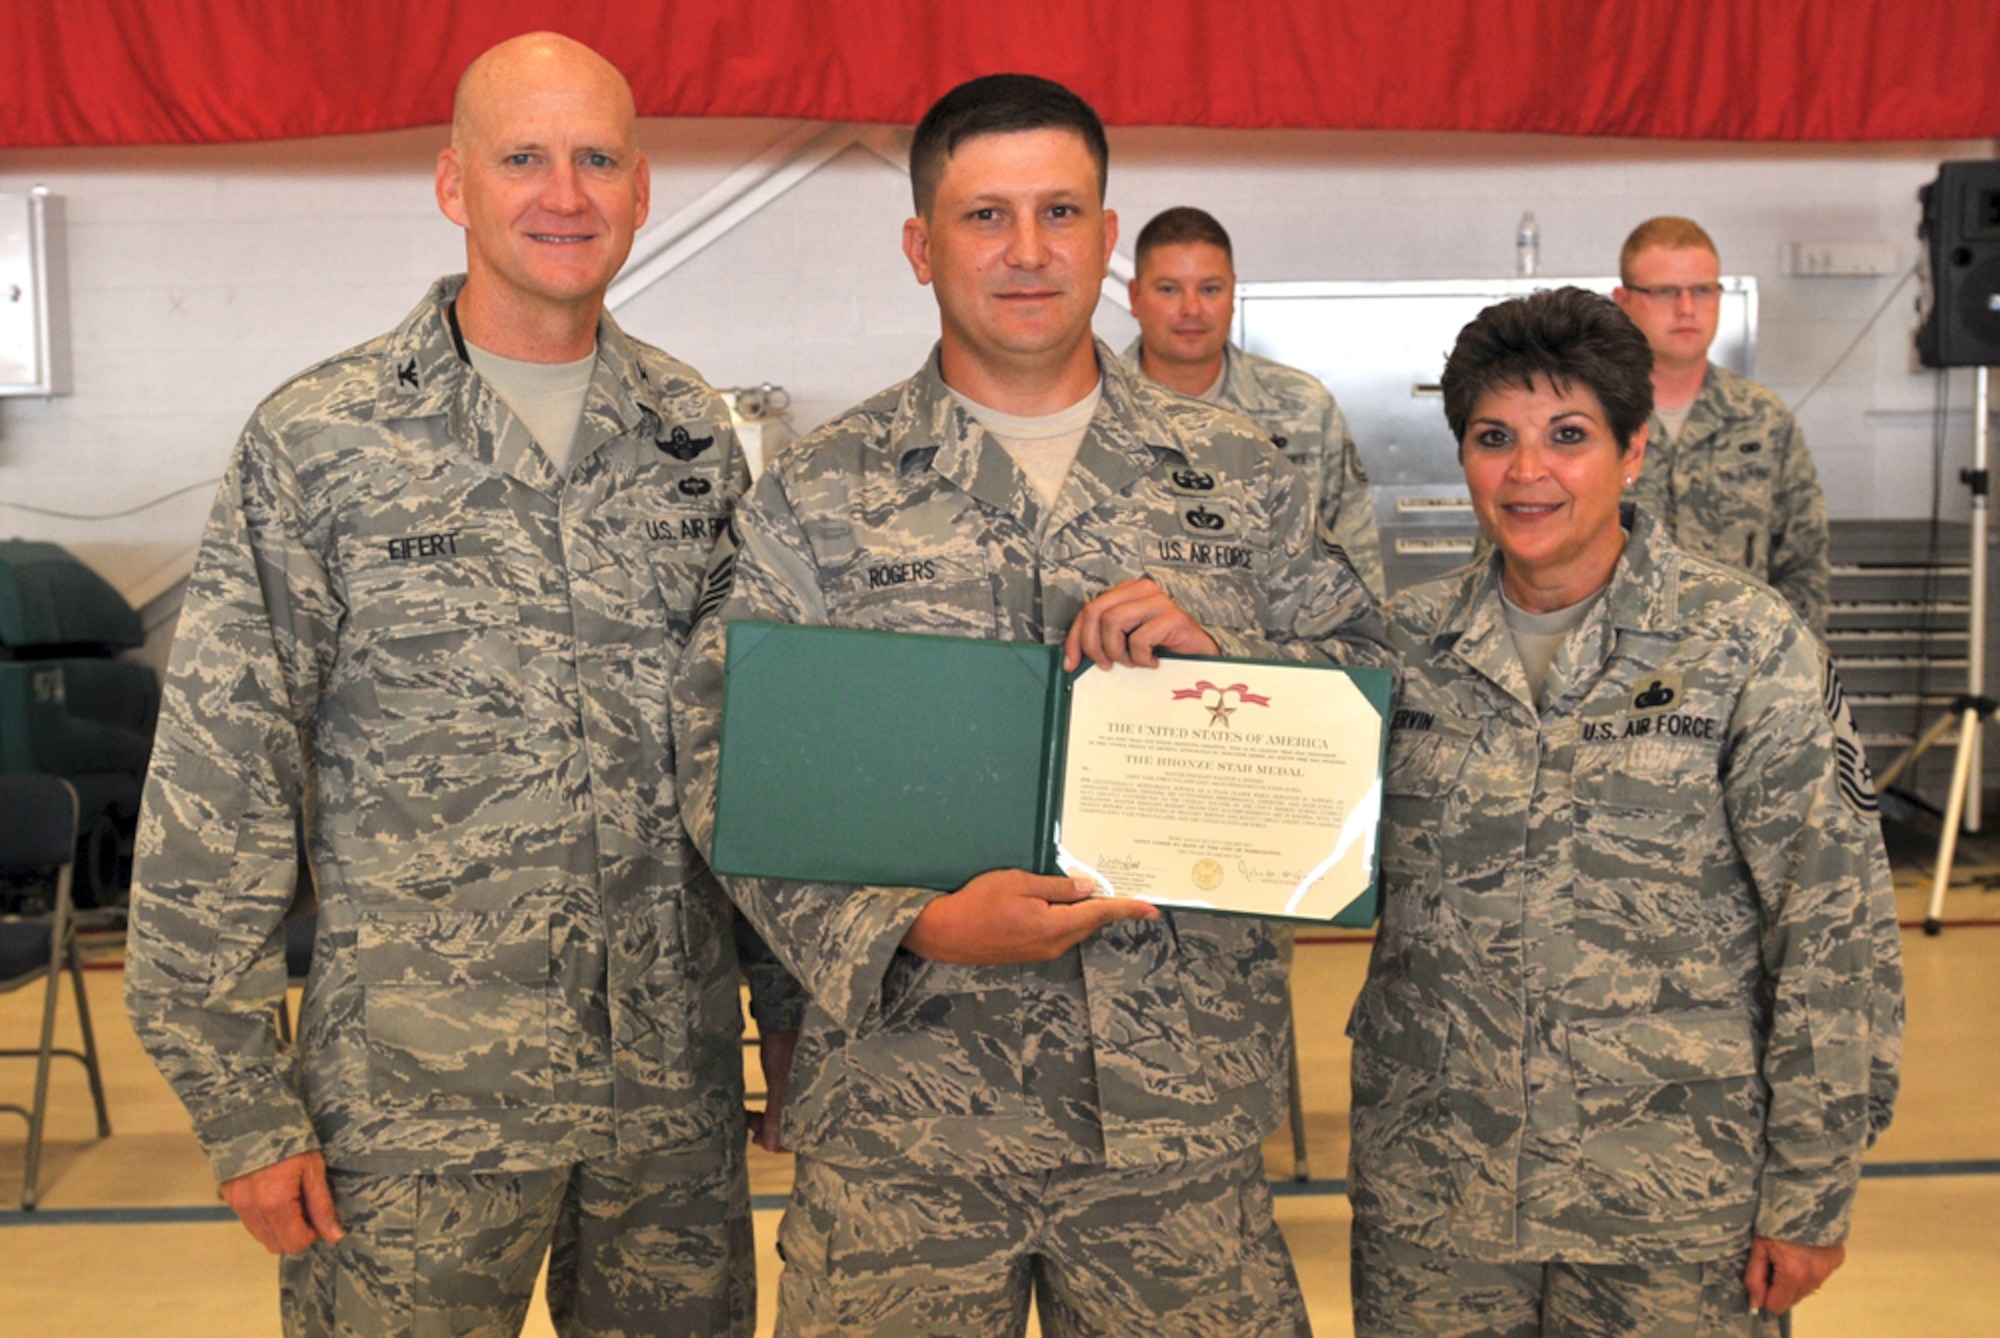 Master Sgt. Raleigh Rogers  (center), stands with 125th Fighter Wing Commander, Col. James Eifert (left) and 125th Fighter Wing Command Chief Master Sgt. Sharon Ervin after Rodgers was awarded the Bronze Star at a ceremony, August 19, 2012, 125th Fighter Wing, Florida Air National Guard, Jacksonville, Fla. Rogers distinguished himself while performing as an EOD team leader in Ghanzni Province, Afghanistan. Rogers found and cleared over 33 IED's on over 69 combat missions, destroyed over a thousand pounds of enemy weaponry, and cleared over 1200 miles of routes allowing freedom of movement for both special and conventional coalition forces